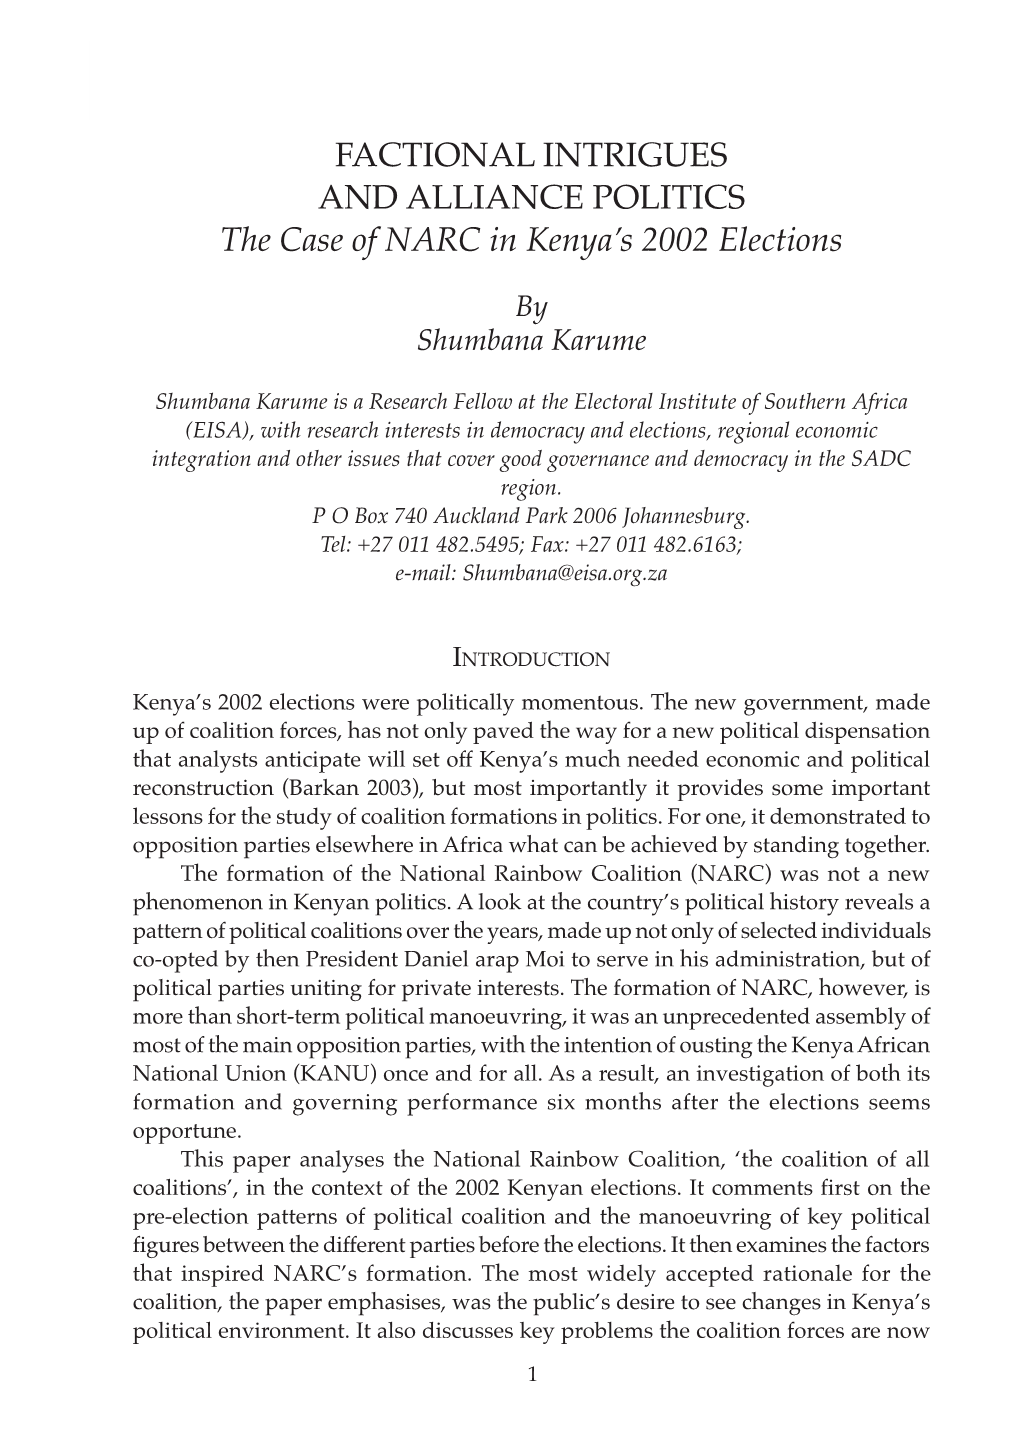 The Case of NARC in Kenya's 2002 Elections